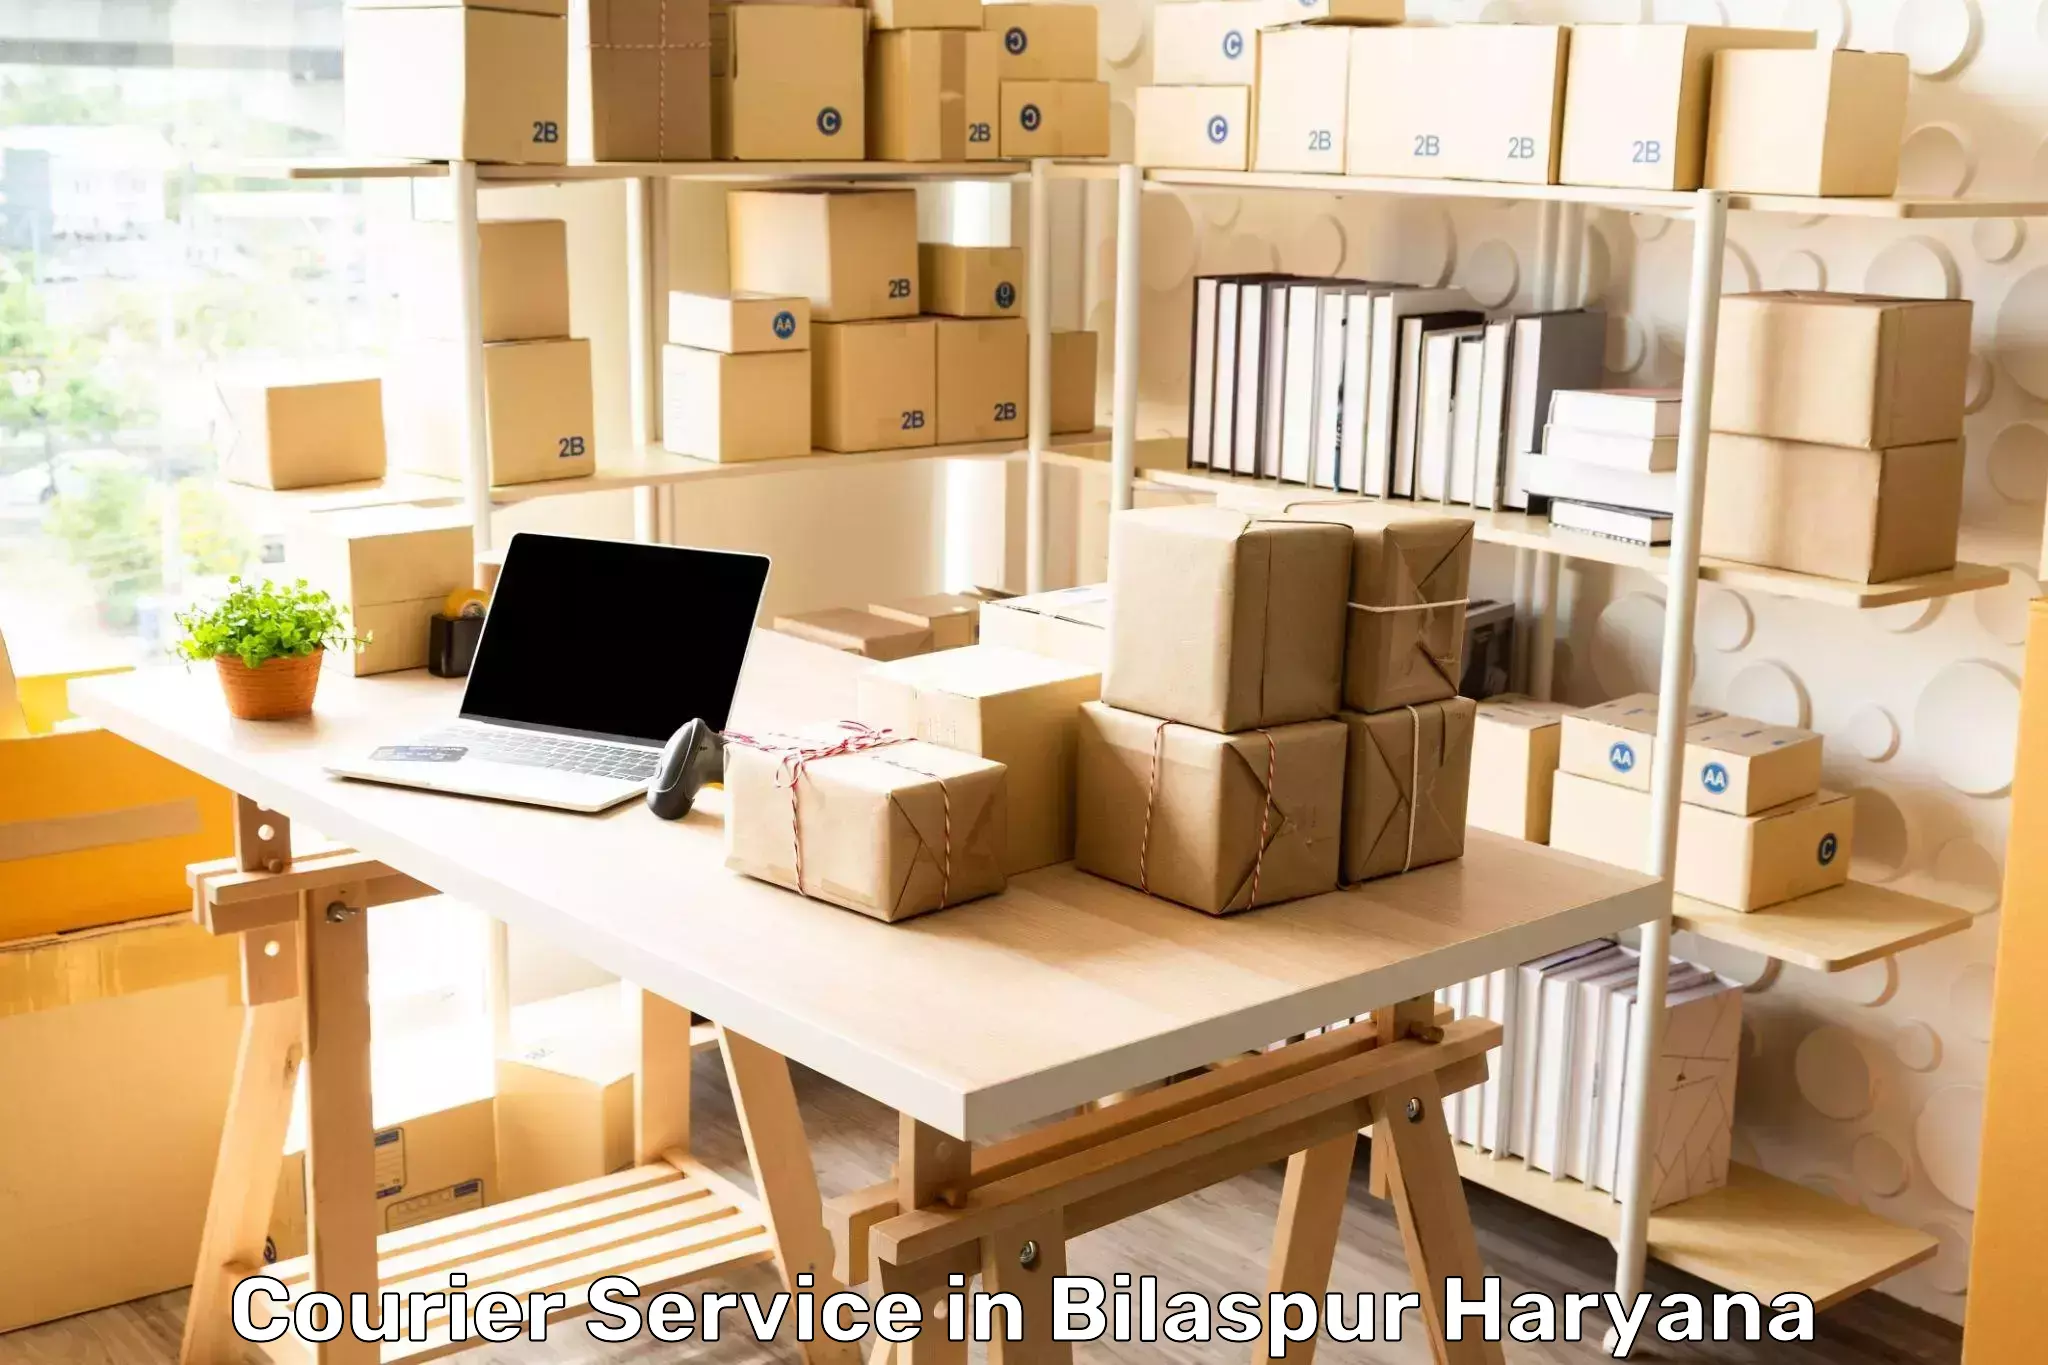 Enhanced delivery experience in Bilaspur Haryana